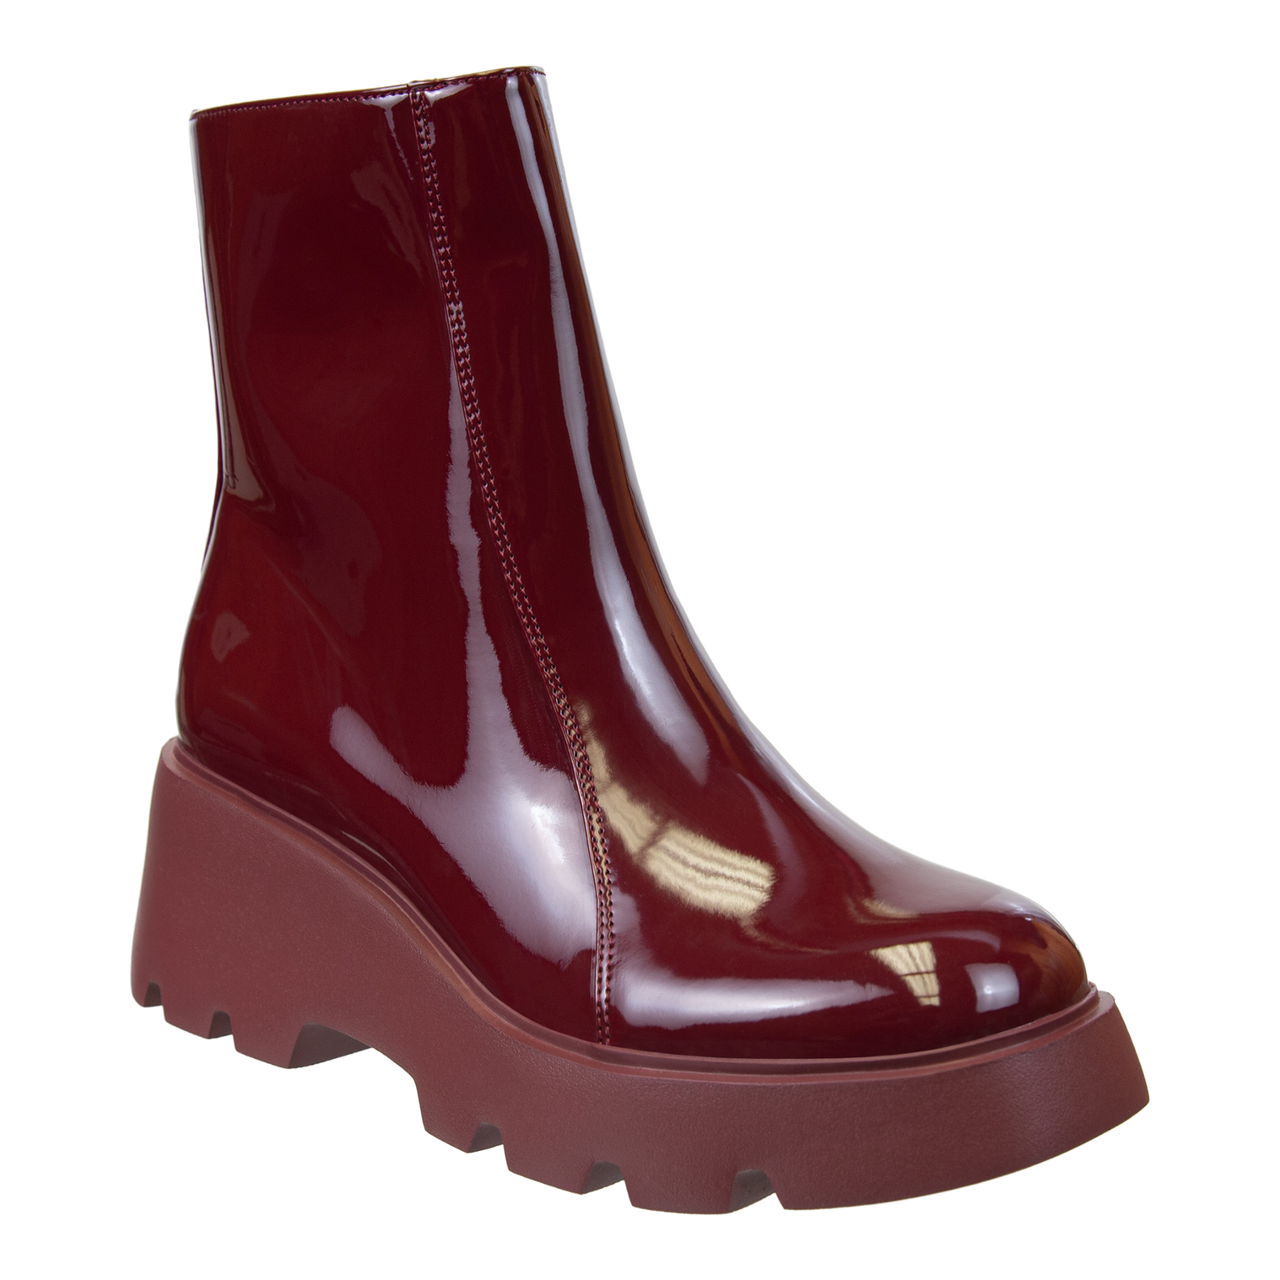 NAKED FEET - XENUS in DEEP RED Platform Ankle Boots